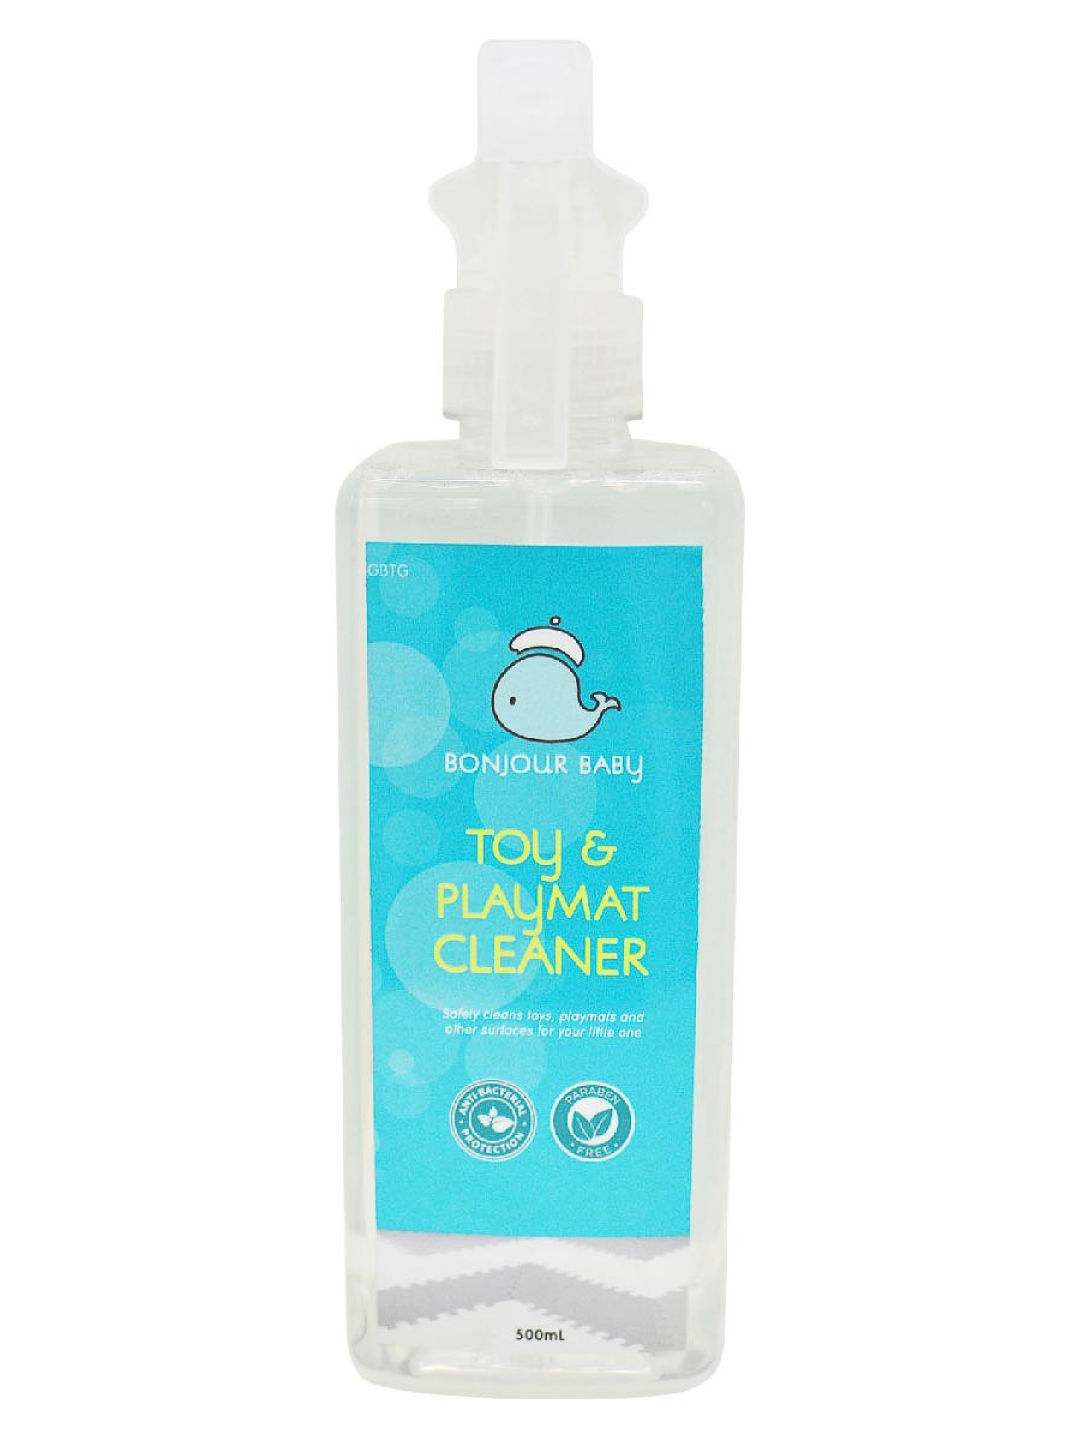 Bonjour Baby Toy & Playmat Cleaner (500ml)